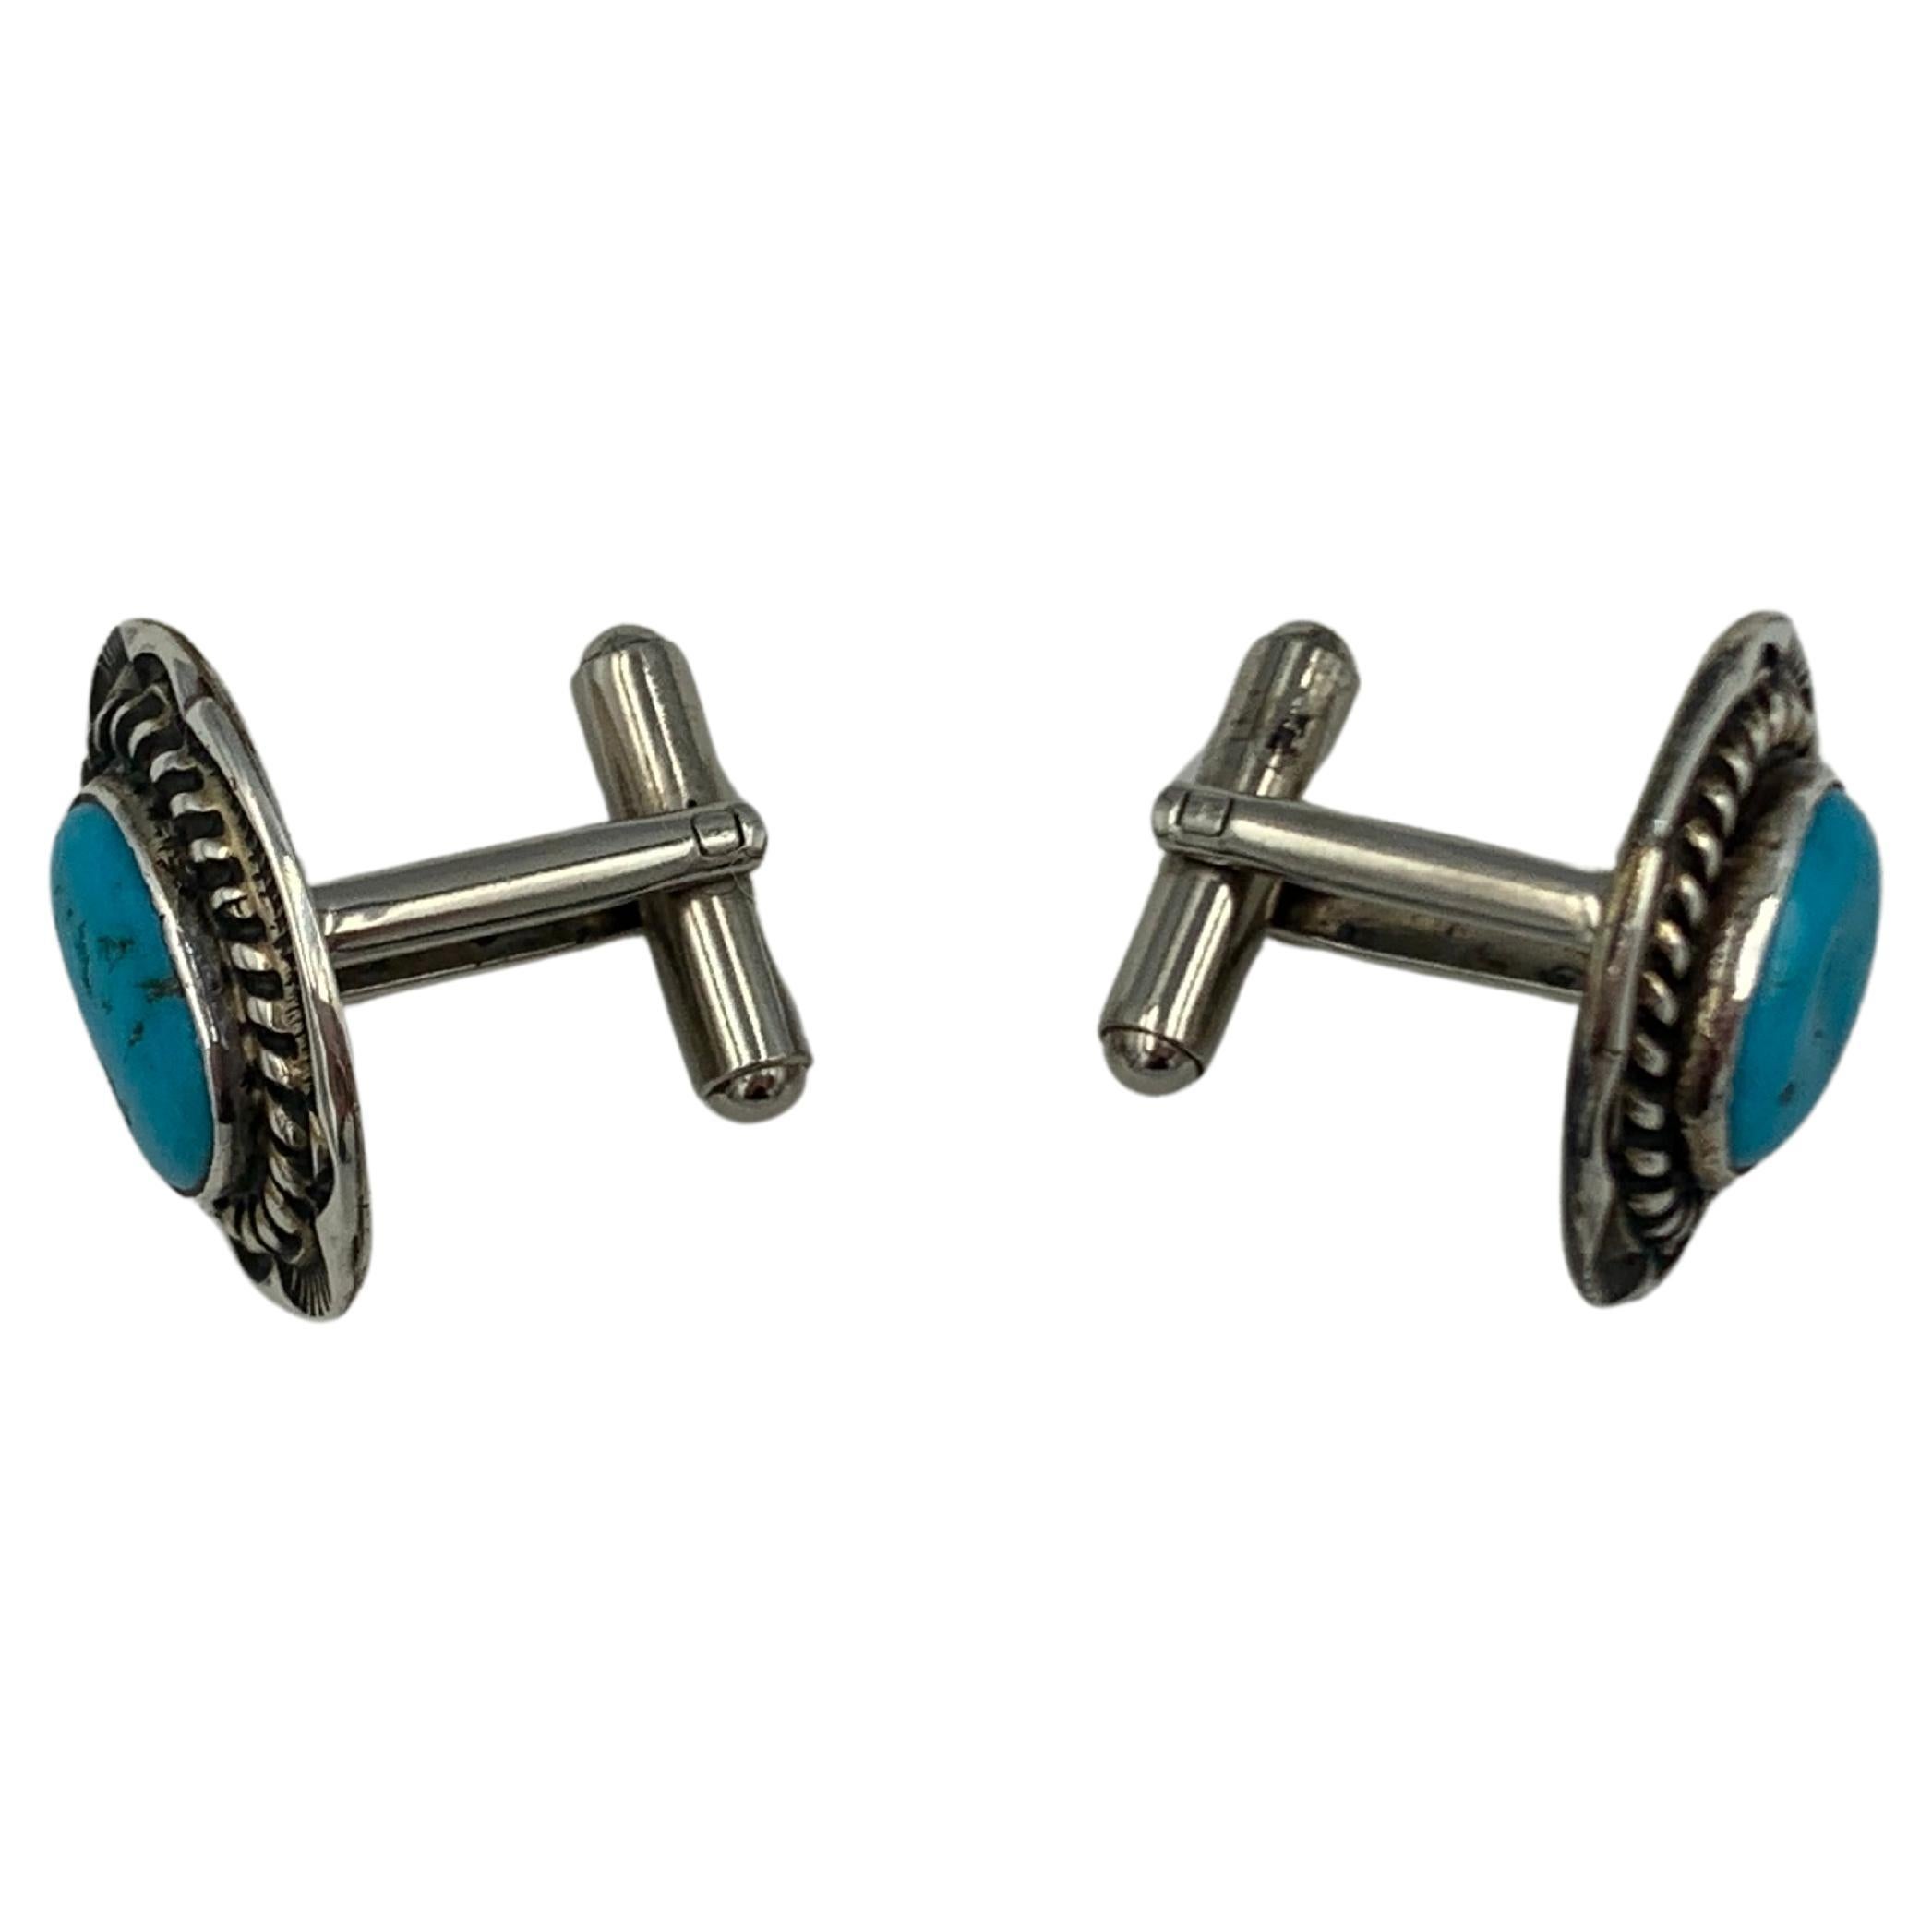 Cuff Links with Kingman Turquoise Gemstone by Navajo silversmith Dan Oliver.

About the artist: Dan Oliver, resident Navajo silversmith at Shades of the West, creates original American Indian jewelry exclusively for Shades of the West and Bischoff’s